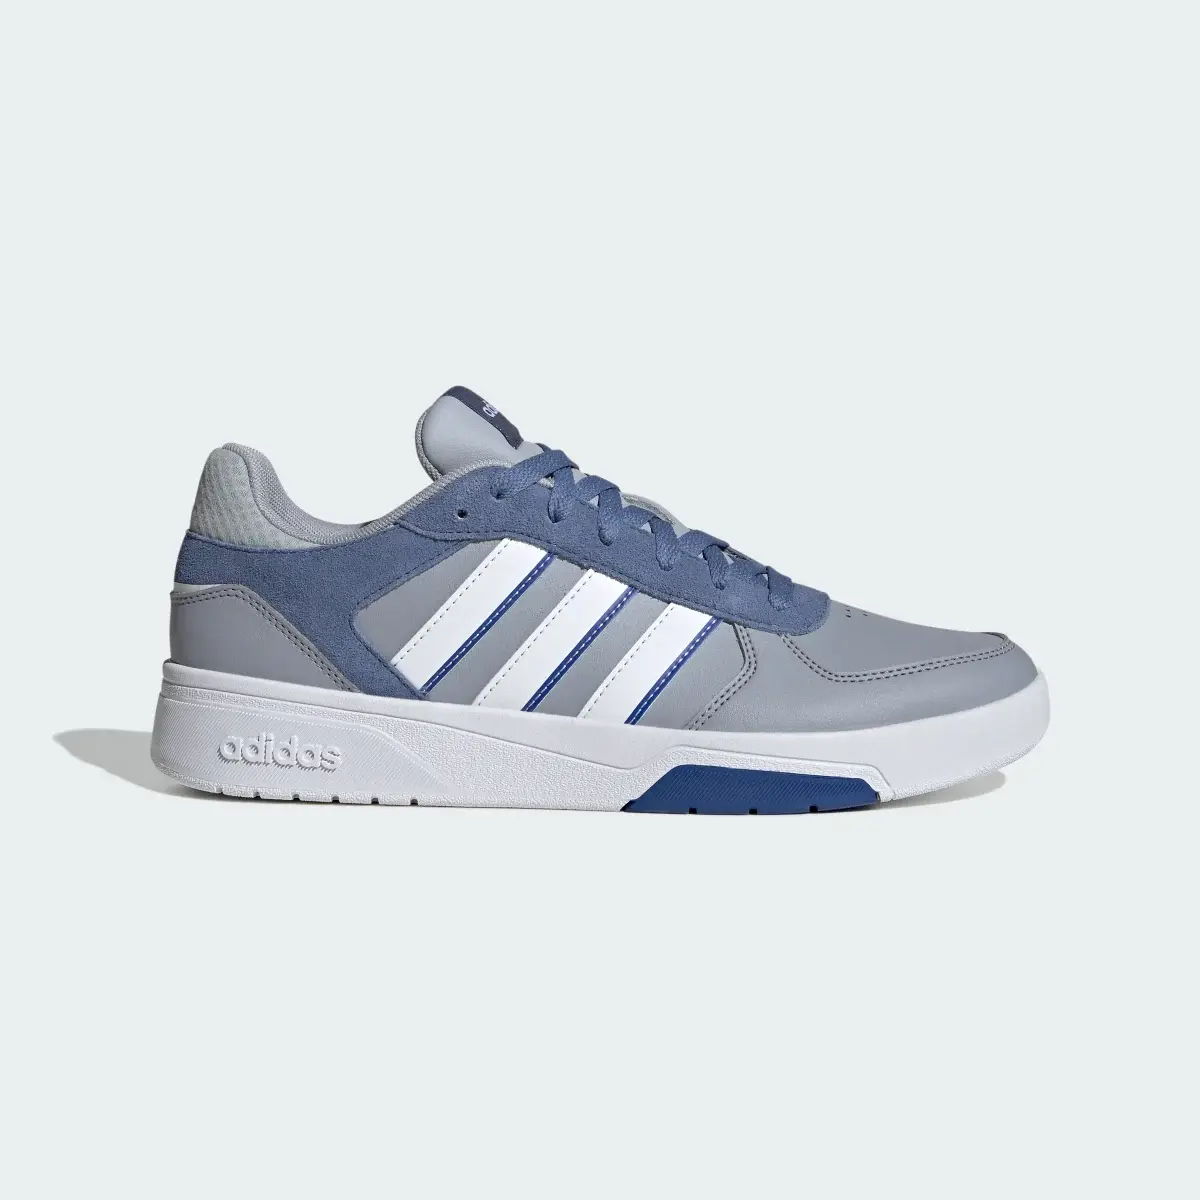 Adidas Courtbeat Shoes. 2